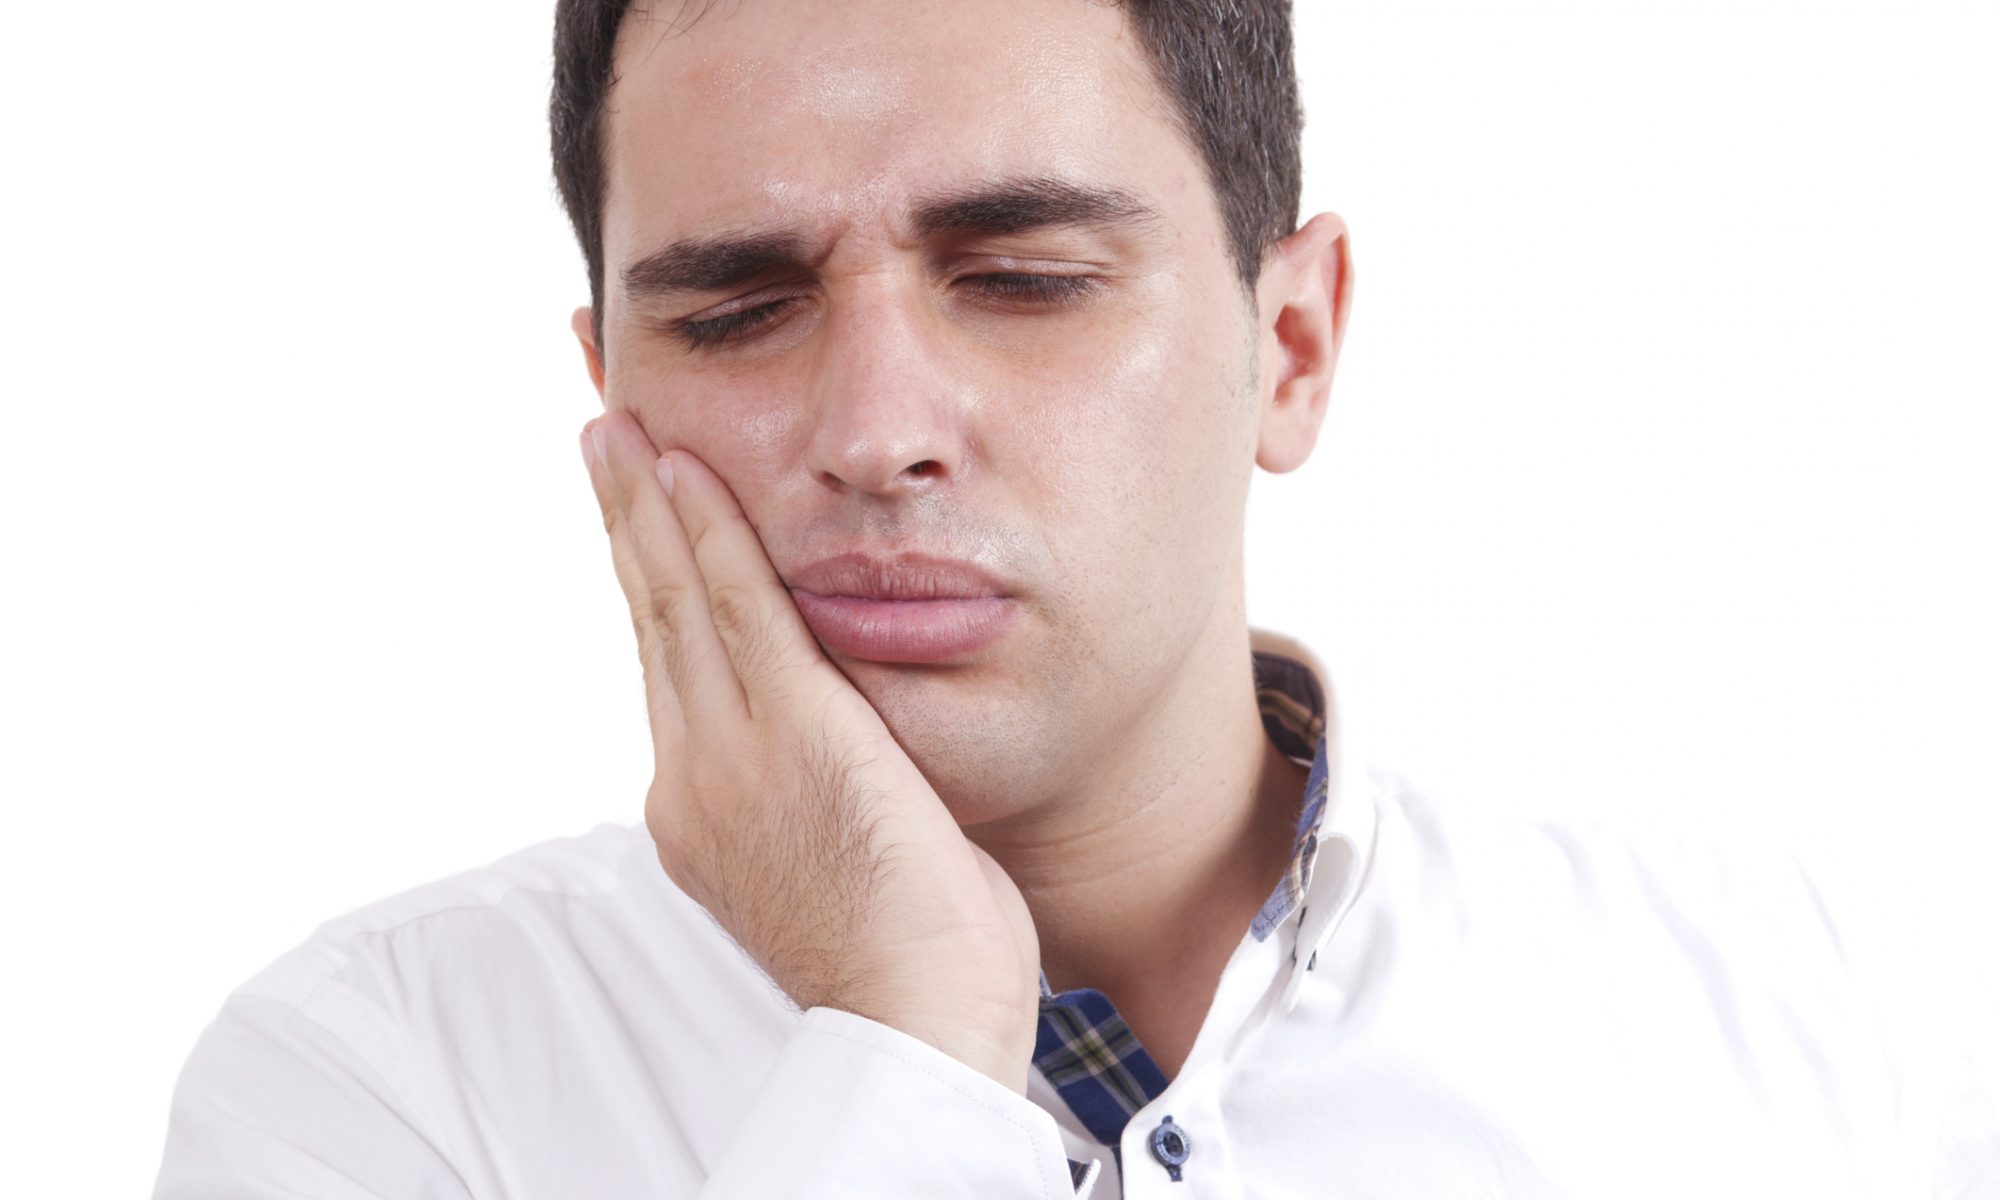 man with jaw pain caused by TMJ, or a cracked or broken tooth